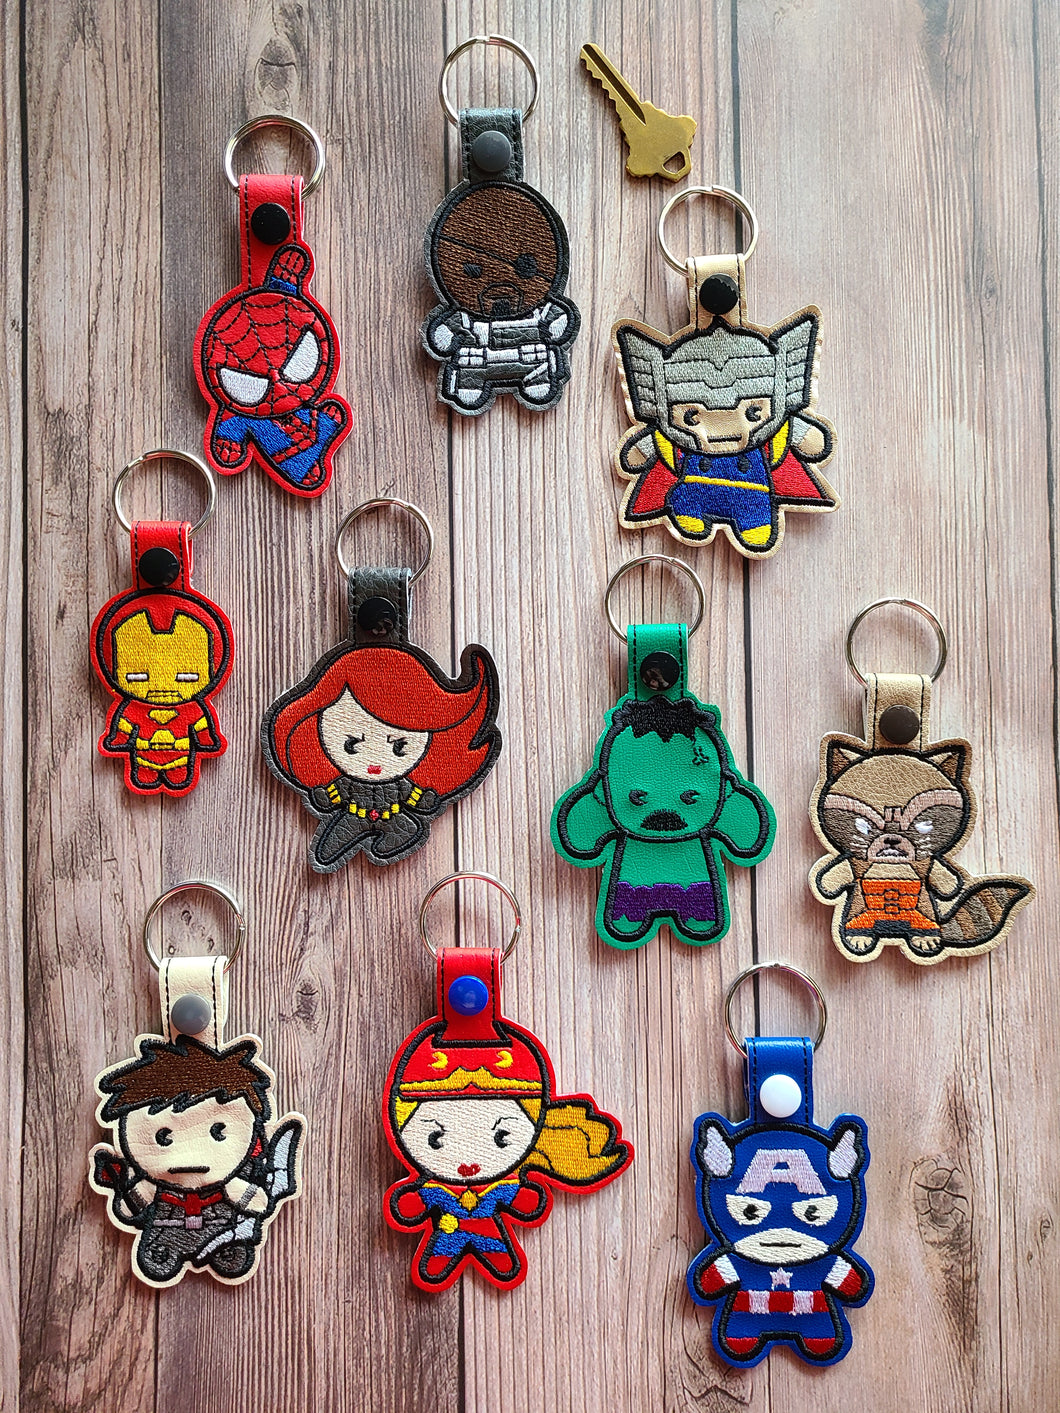 Chibi Key Fobs Inspired By Superhero Characters - Keychains - Backpack Decoration - Bag Bling